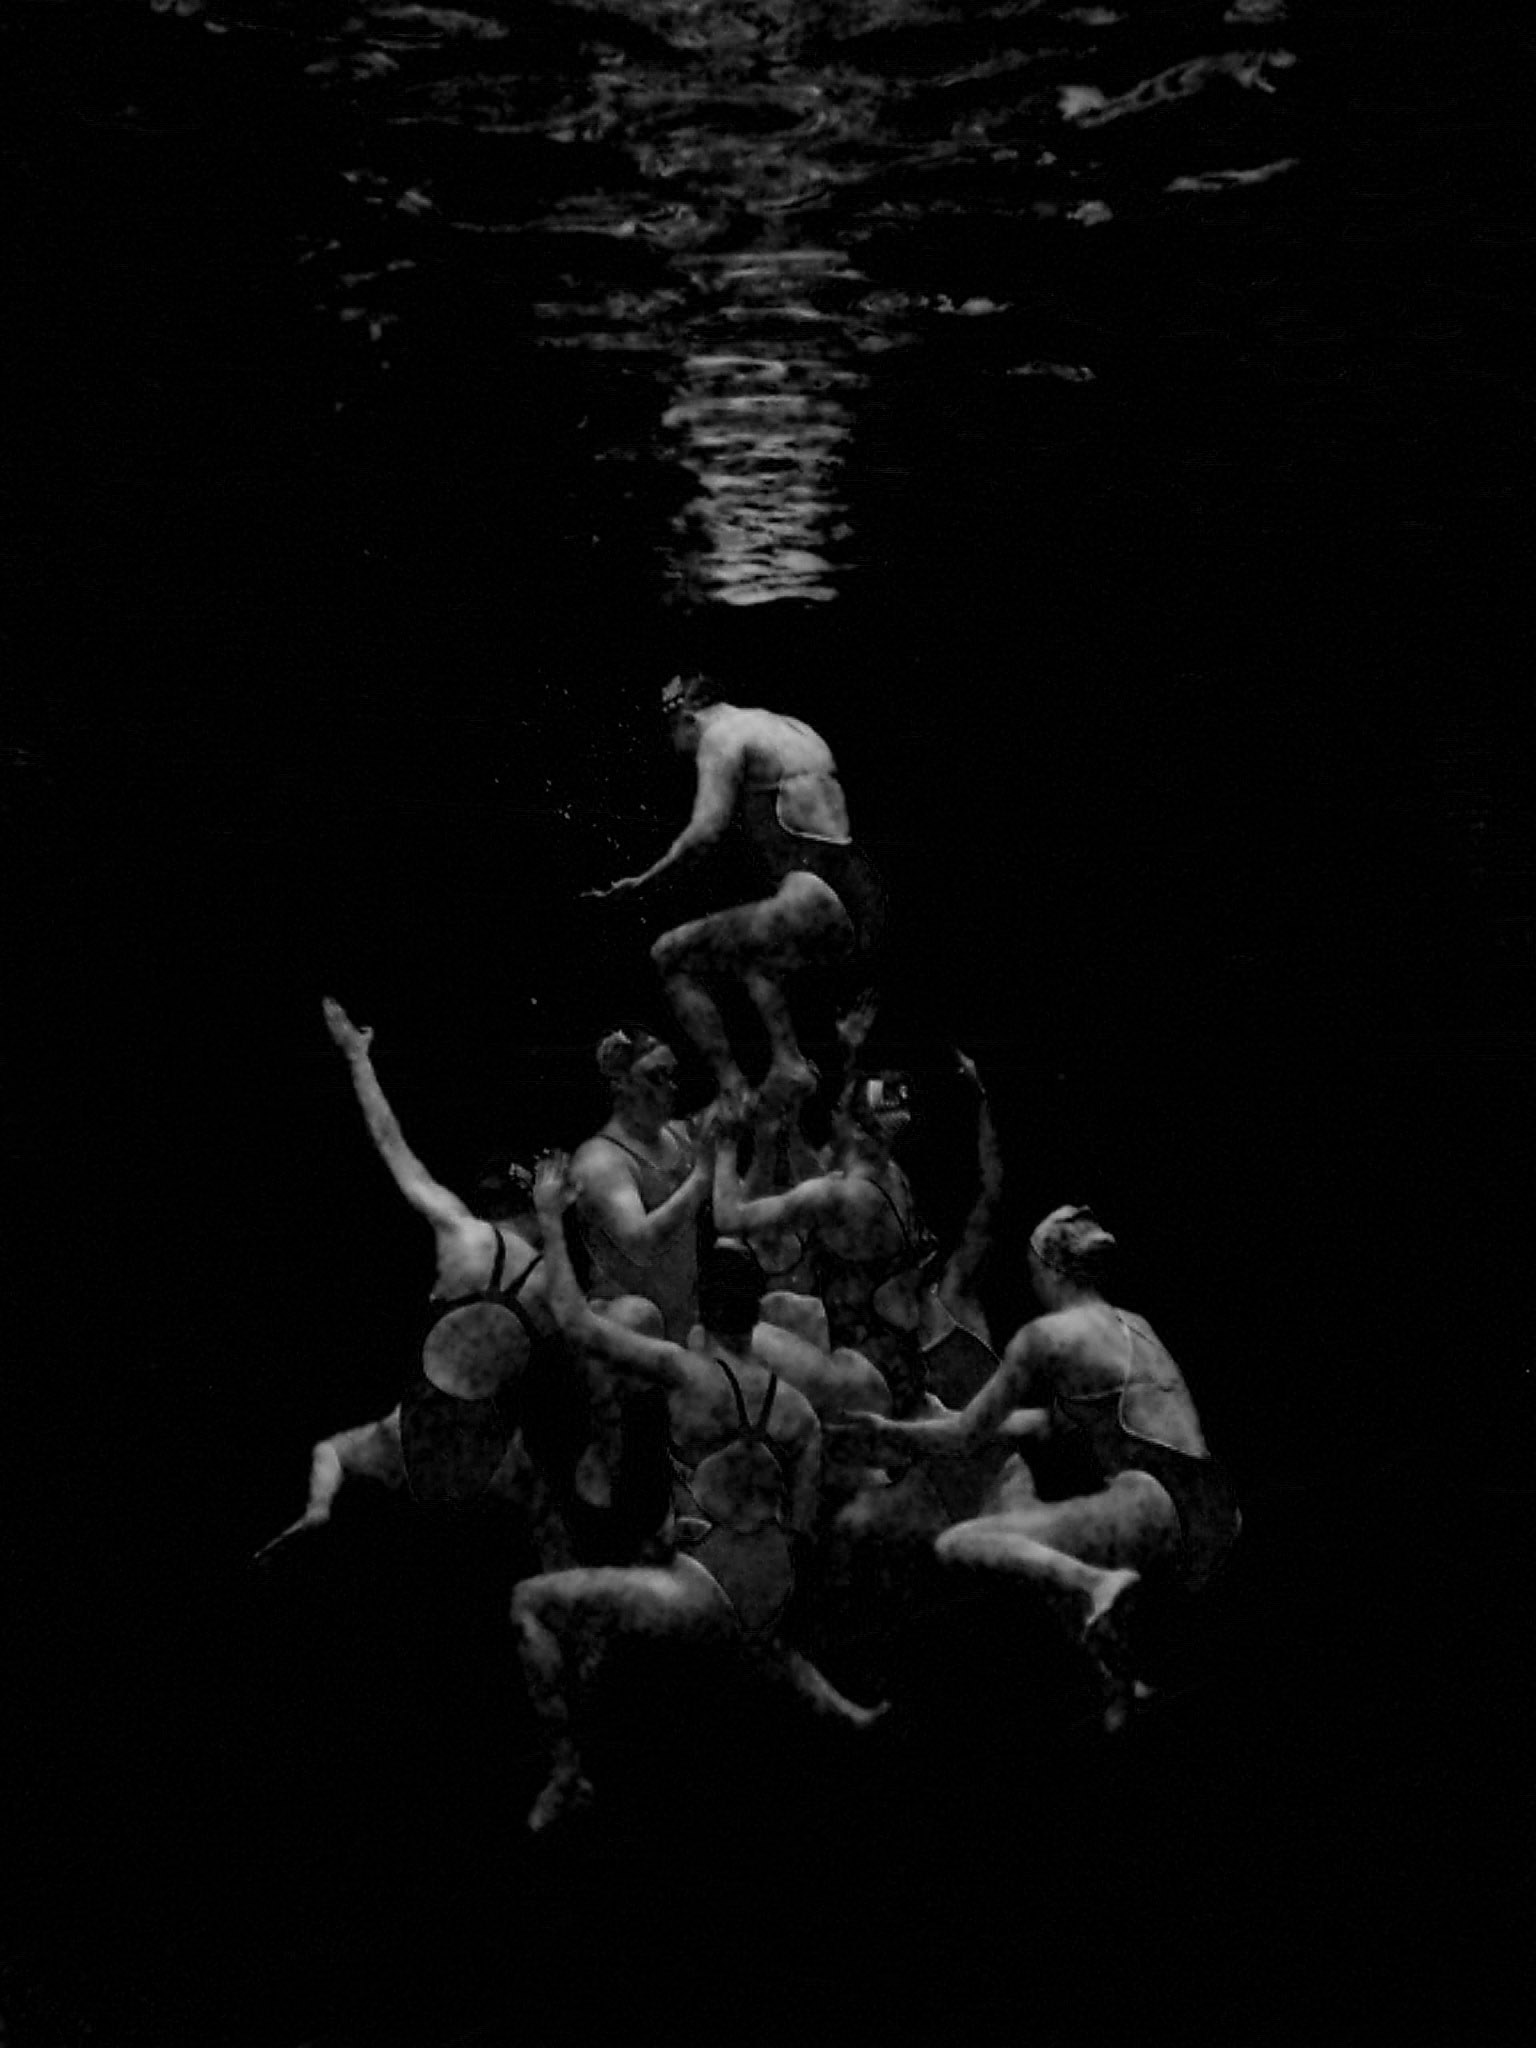 underwater art photograph synchronized swimming lift swimmers